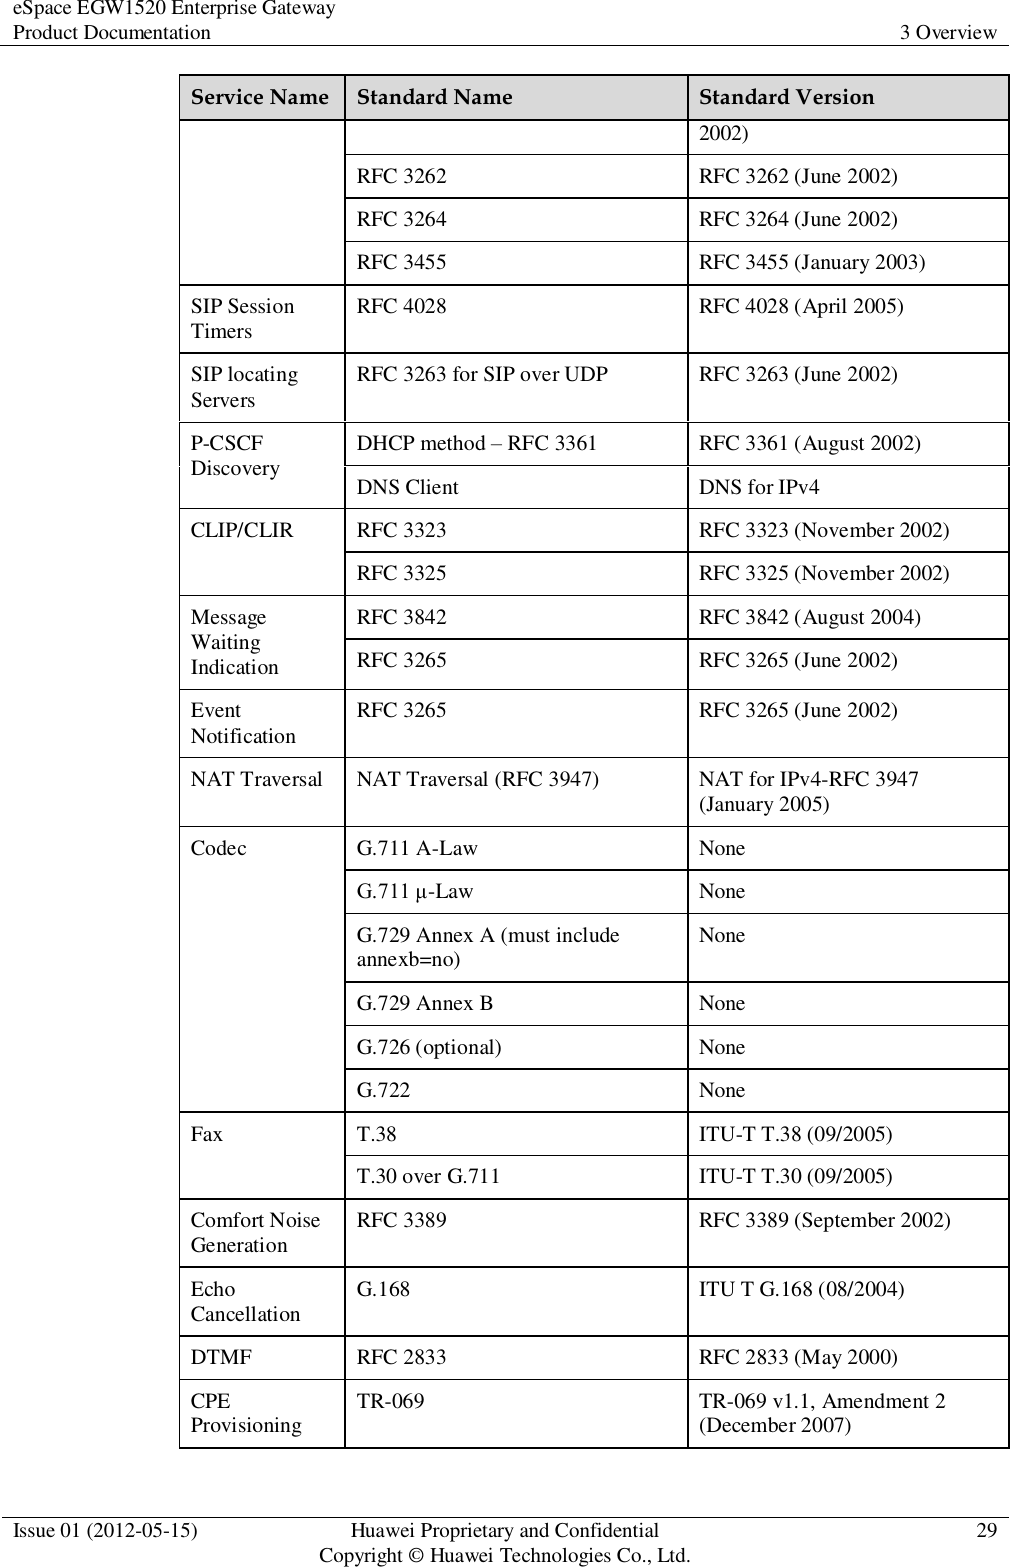 eSpace EGW1520 Enterprise Gateway Product Documentation 3 Overview  Issue 01 (2012-05-15) Huawei Proprietary and Confidential                                     Copyright © Huawei Technologies Co., Ltd. 29  Service Name Standard Name Standard Version 2002) RFC 3262 RFC 3262 (June 2002) RFC 3264 RFC 3264 (June 2002) RFC 3455 RFC 3455 (January 2003) SIP Session Timers RFC 4028 RFC 4028 (April 2005) SIP locating Servers RFC 3263 for SIP over UDP RFC 3263 (June 2002) P-CSCF Discovery DHCP method – RFC 3361 RFC 3361 (August 2002) DNS Client DNS for IPv4 CLIP/CLIR RFC 3323 RFC 3323 (November 2002) RFC 3325 RFC 3325 (November 2002) Message Waiting Indication RFC 3842 RFC 3842 (August 2004) RFC 3265 RFC 3265 (June 2002) Event Notification RFC 3265 RFC 3265 (June 2002) NAT Traversal NAT Traversal (RFC 3947) NAT for IPv4-RFC 3947 (January 2005) Codec G.711 A-Law None G.711 μ-Law None G.729 Annex A (must include annexb=no) None G.729 Annex B None G.726 (optional) None G.722 None Fax T.38 ITU-T T.38 (09/2005) T.30 over G.711 ITU-T T.30 (09/2005) Comfort Noise Generation RFC 3389 RFC 3389 (September 2002) Echo Cancellation G.168 ITU T G.168 (08/2004) DTMF RFC 2833 RFC 2833 (May 2000) CPE Provisioning TR-069 TR-069 v1.1, Amendment 2 (December 2007) 